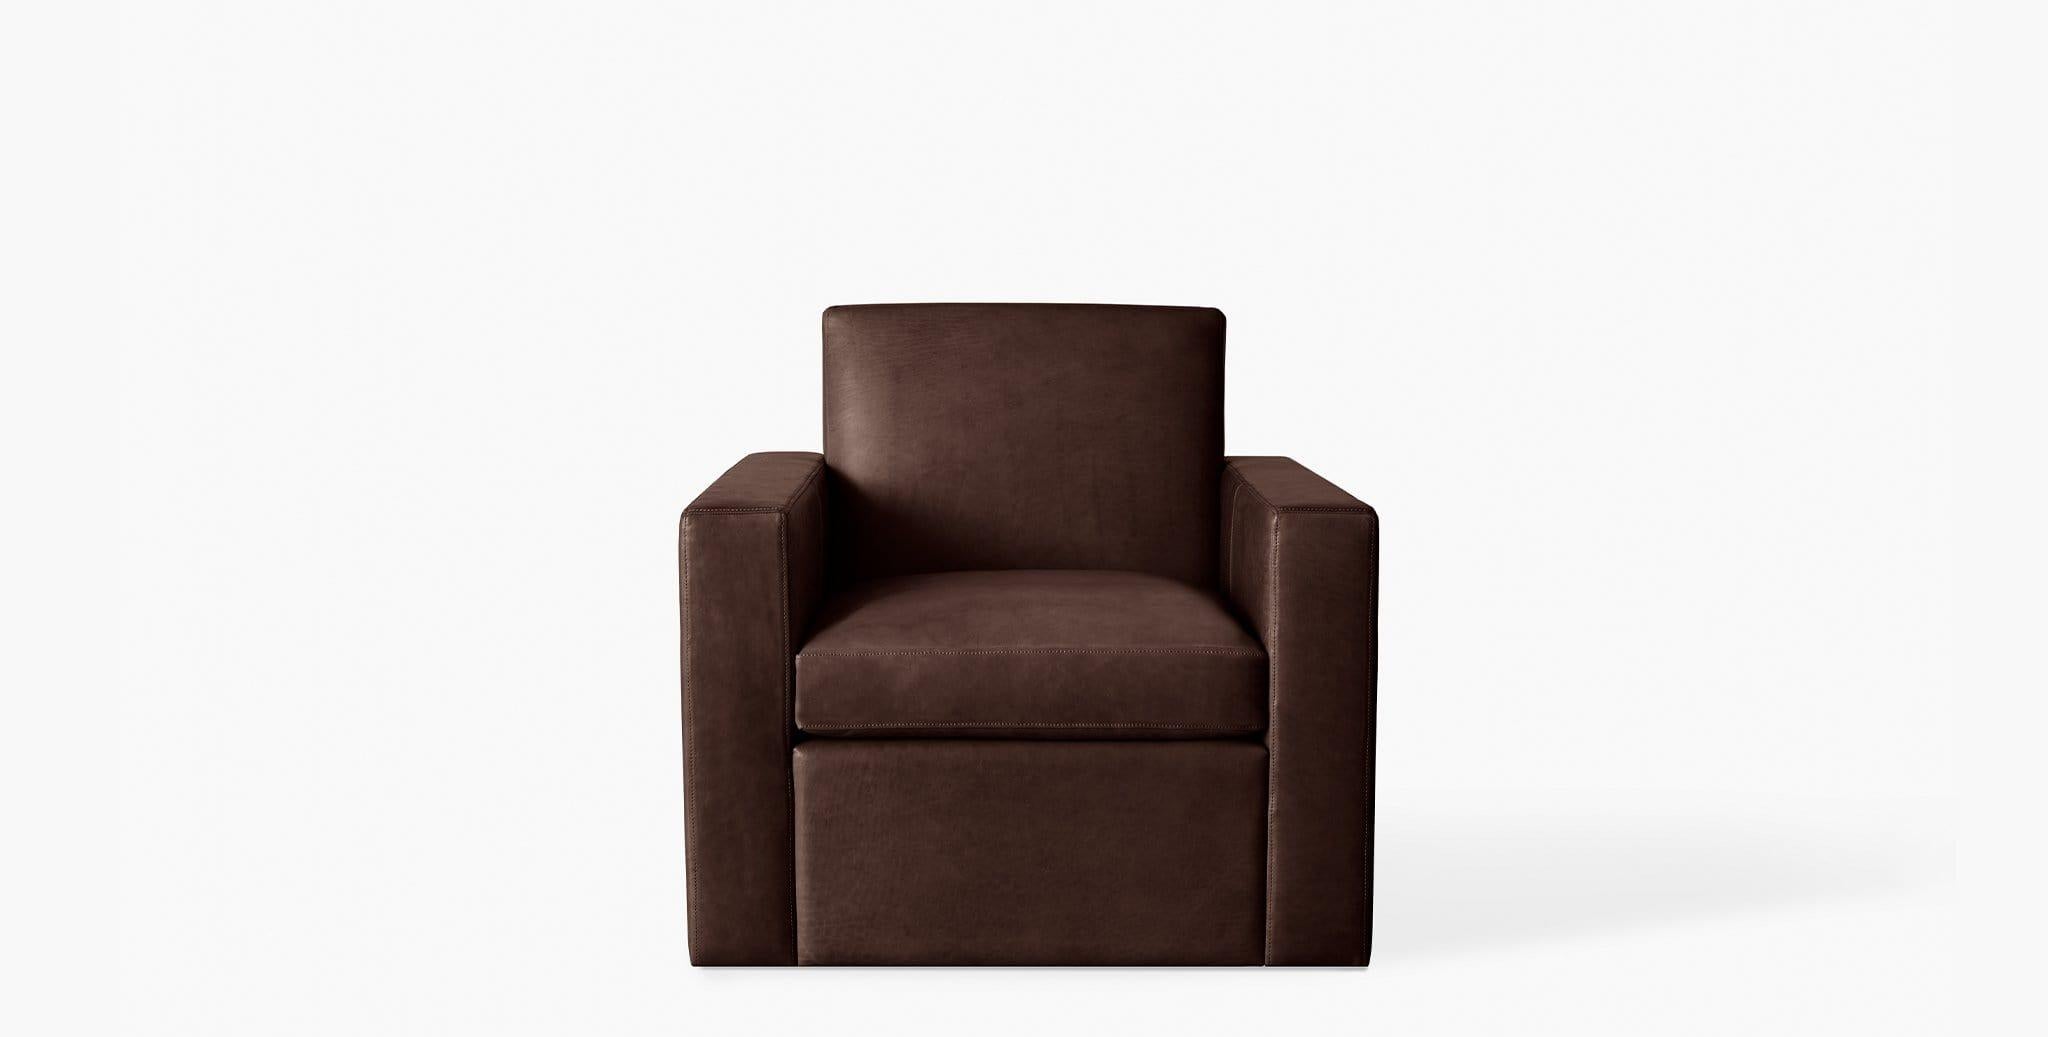 Our Noble Leather Swivel Chair's padded track arms, plush cushions and smooth swivel function creates a coveted seat for your home or office. Our handcrafted fabrics, leathers, and finishes are inspired by the natural variations within fibers,